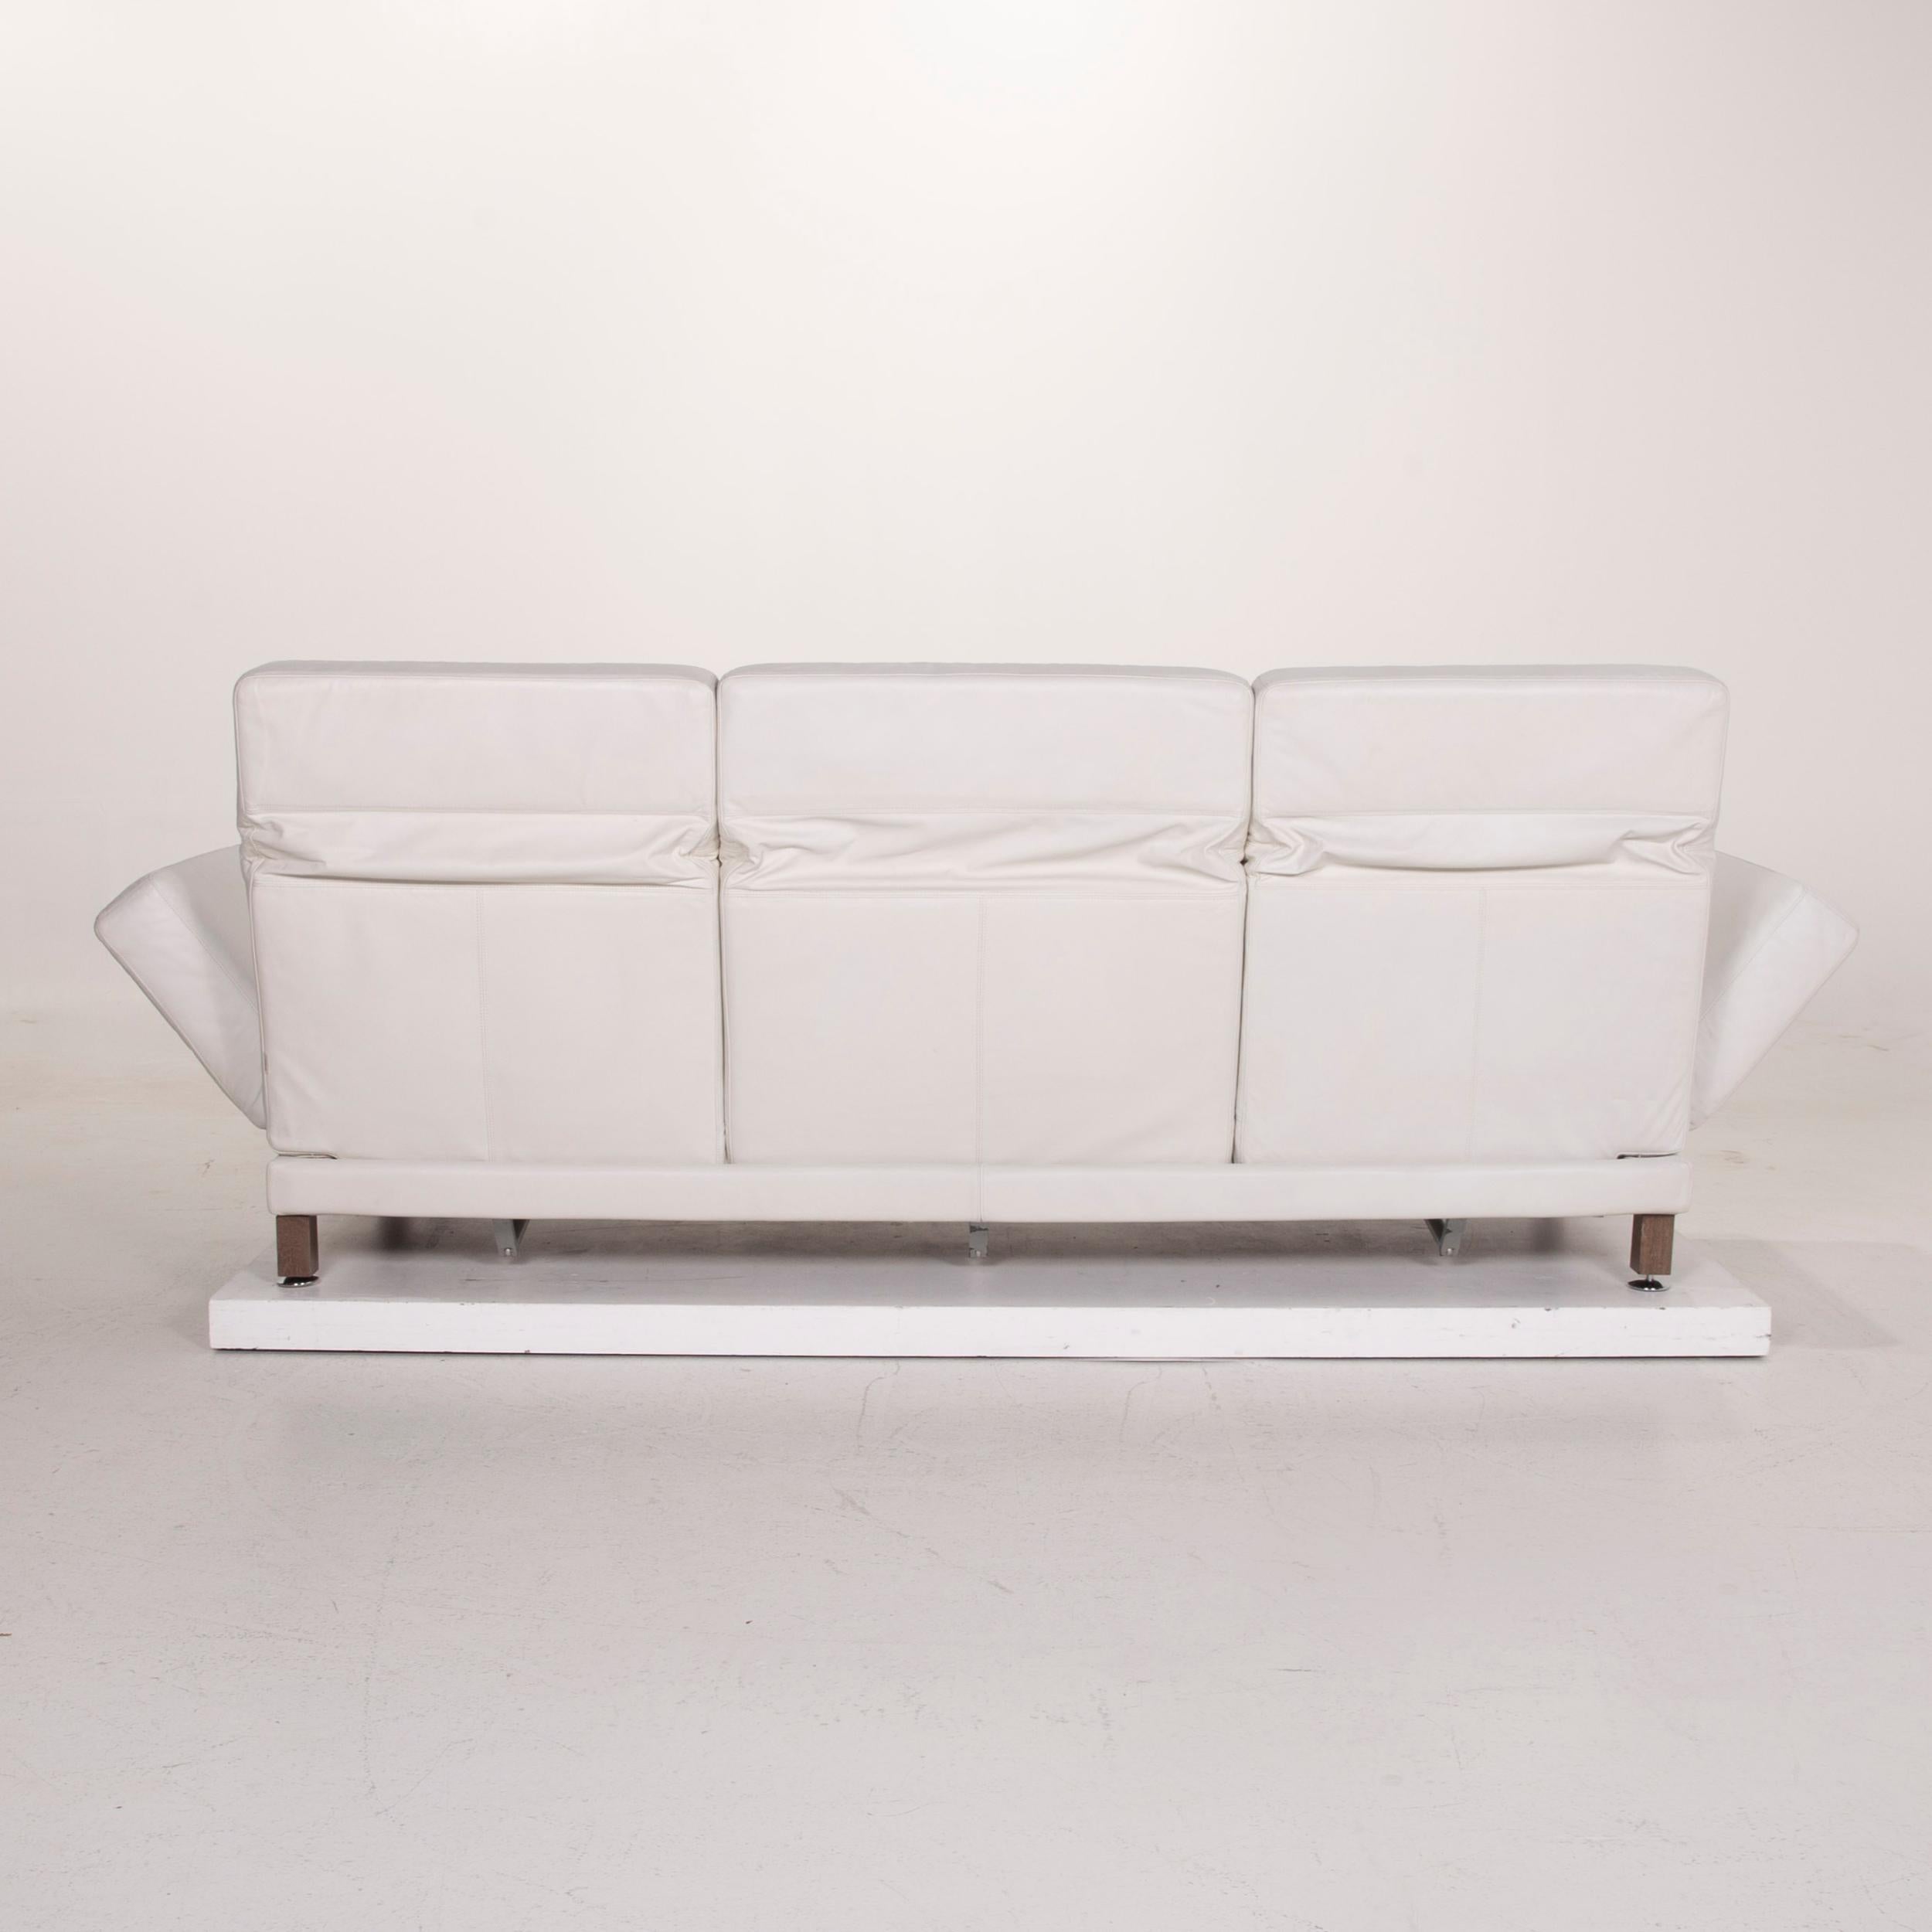 Brühl & Sippold Moule Leather Sofa Set White Three-Seater Relax Function Stool 11